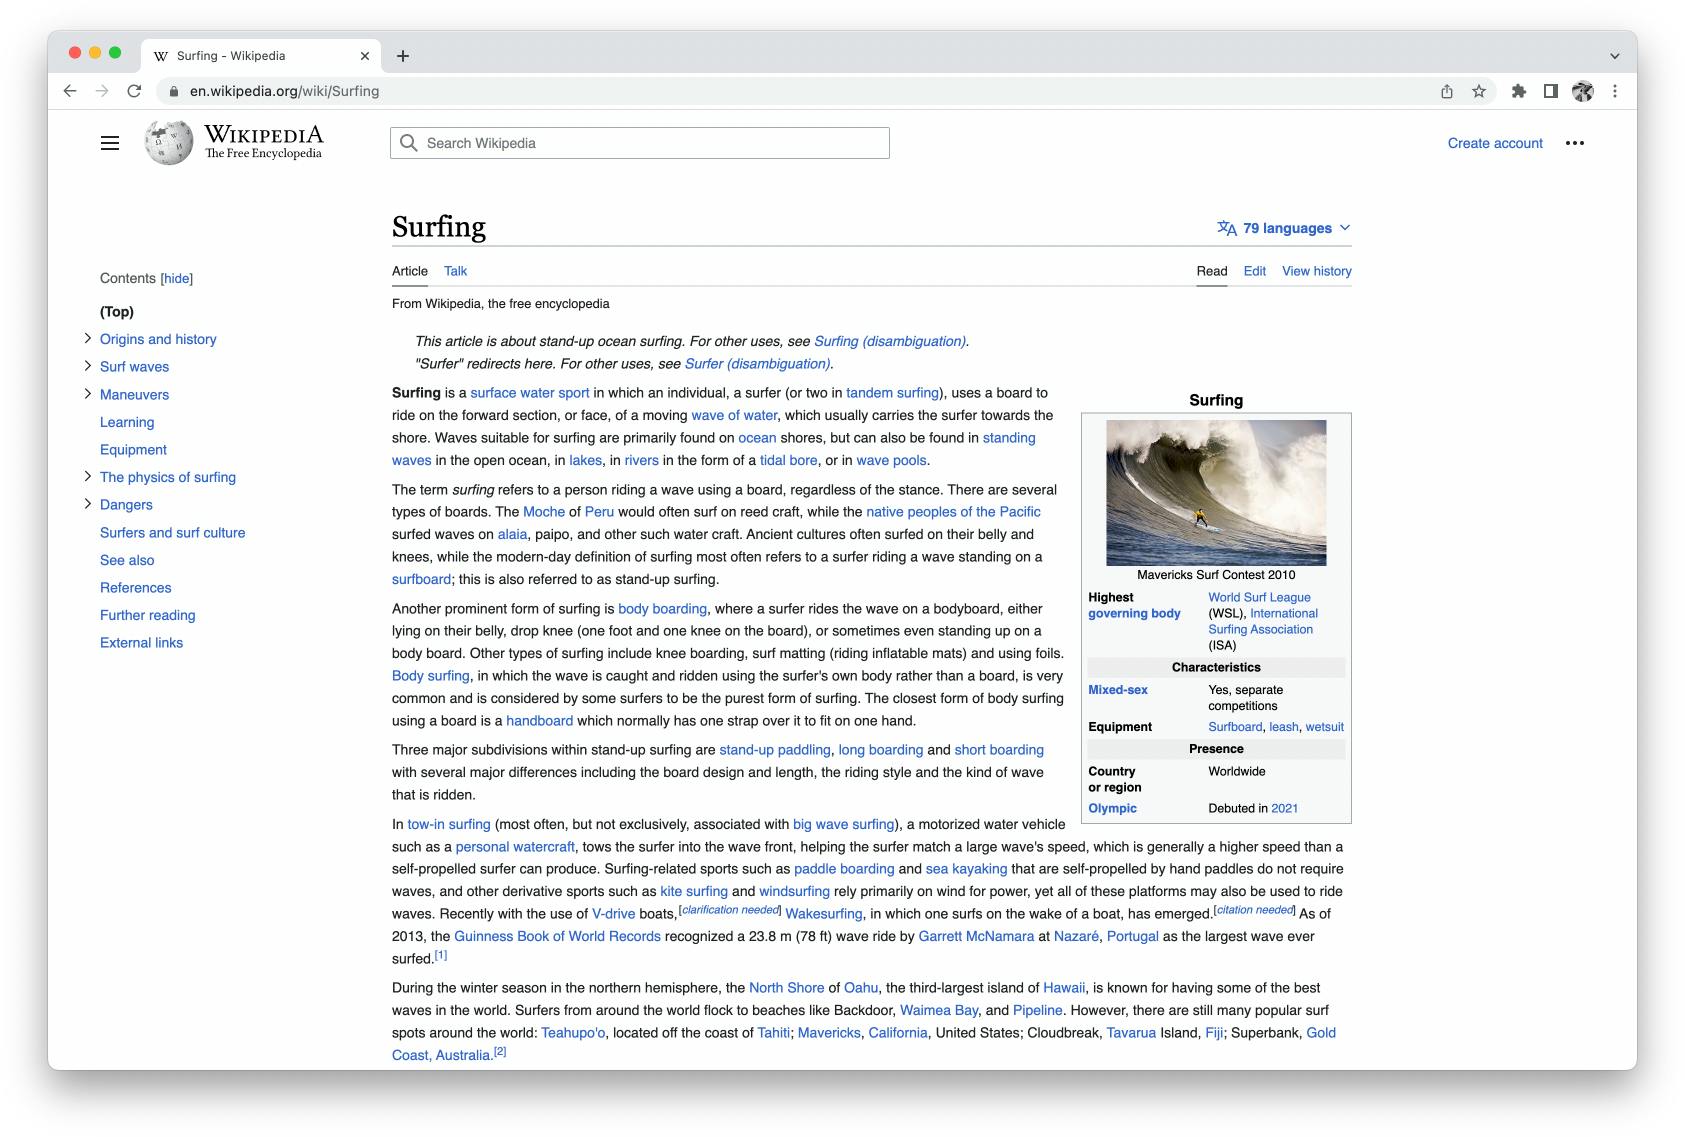 Updated interface, Surfing article on English Wikipedia